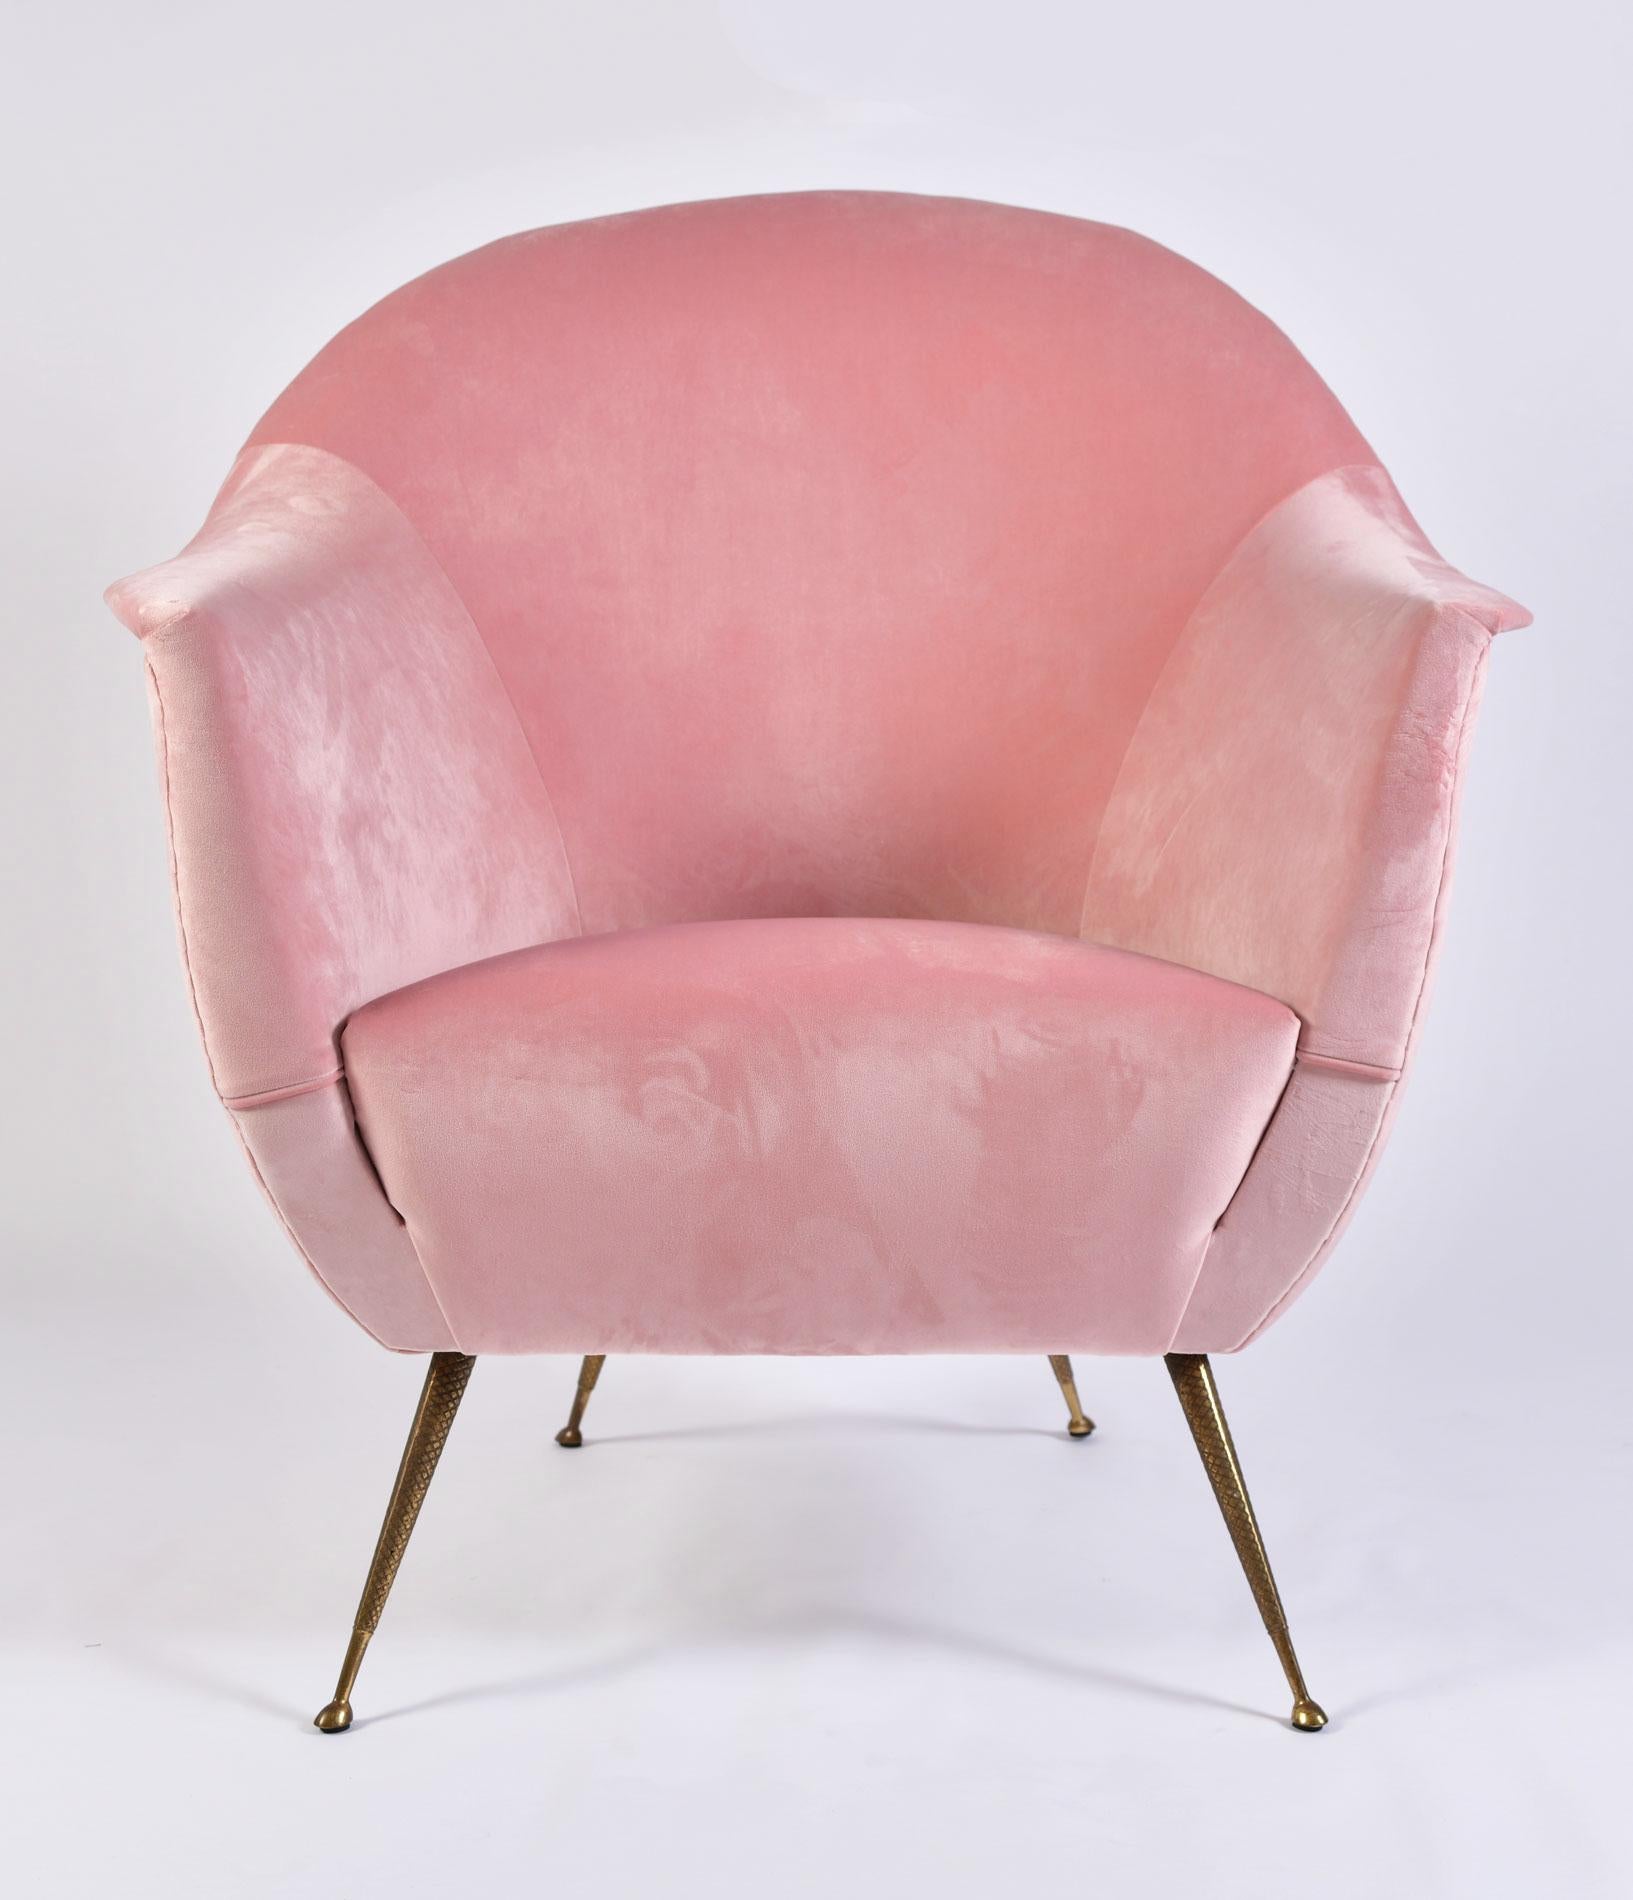 Luxuriously shaped pair of midcentury Italian armchairs recently re-upholstered in
softest pale pink velvet.
Dull gold tapered legs are etched in subtle criss-cross pattern.
 